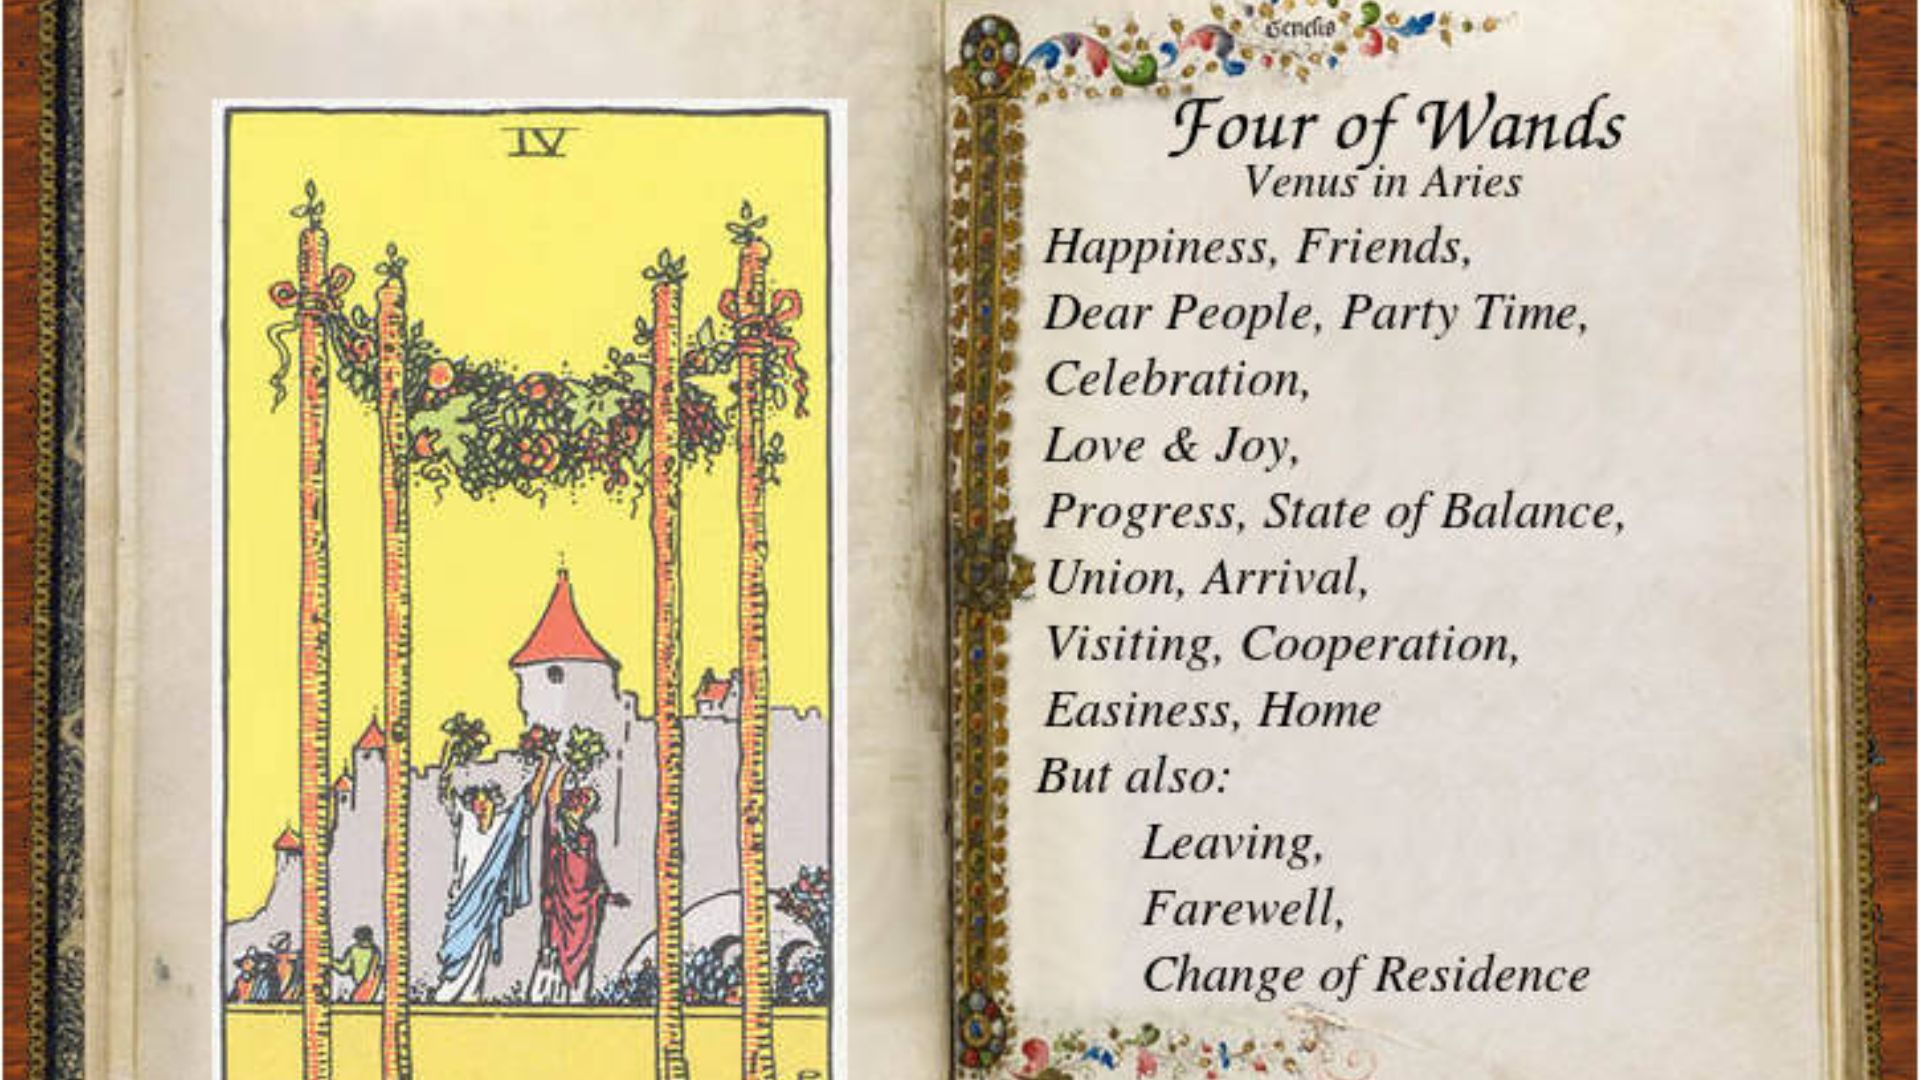 4 Of Wands Tarot Card With Its Description